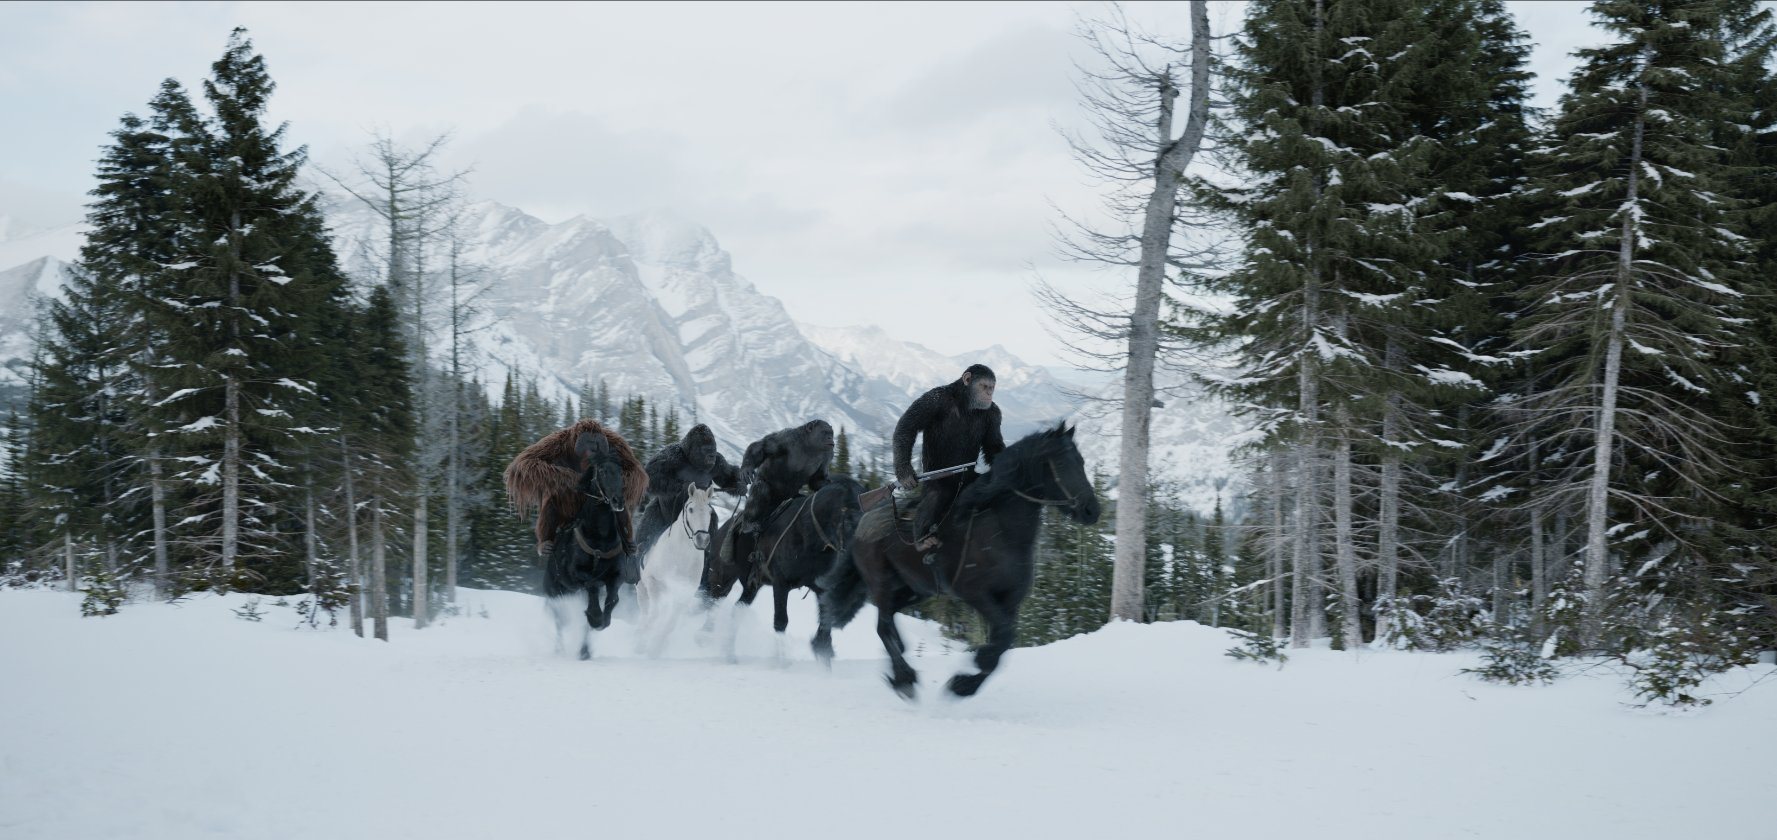 Men and apes riding horses through the snow